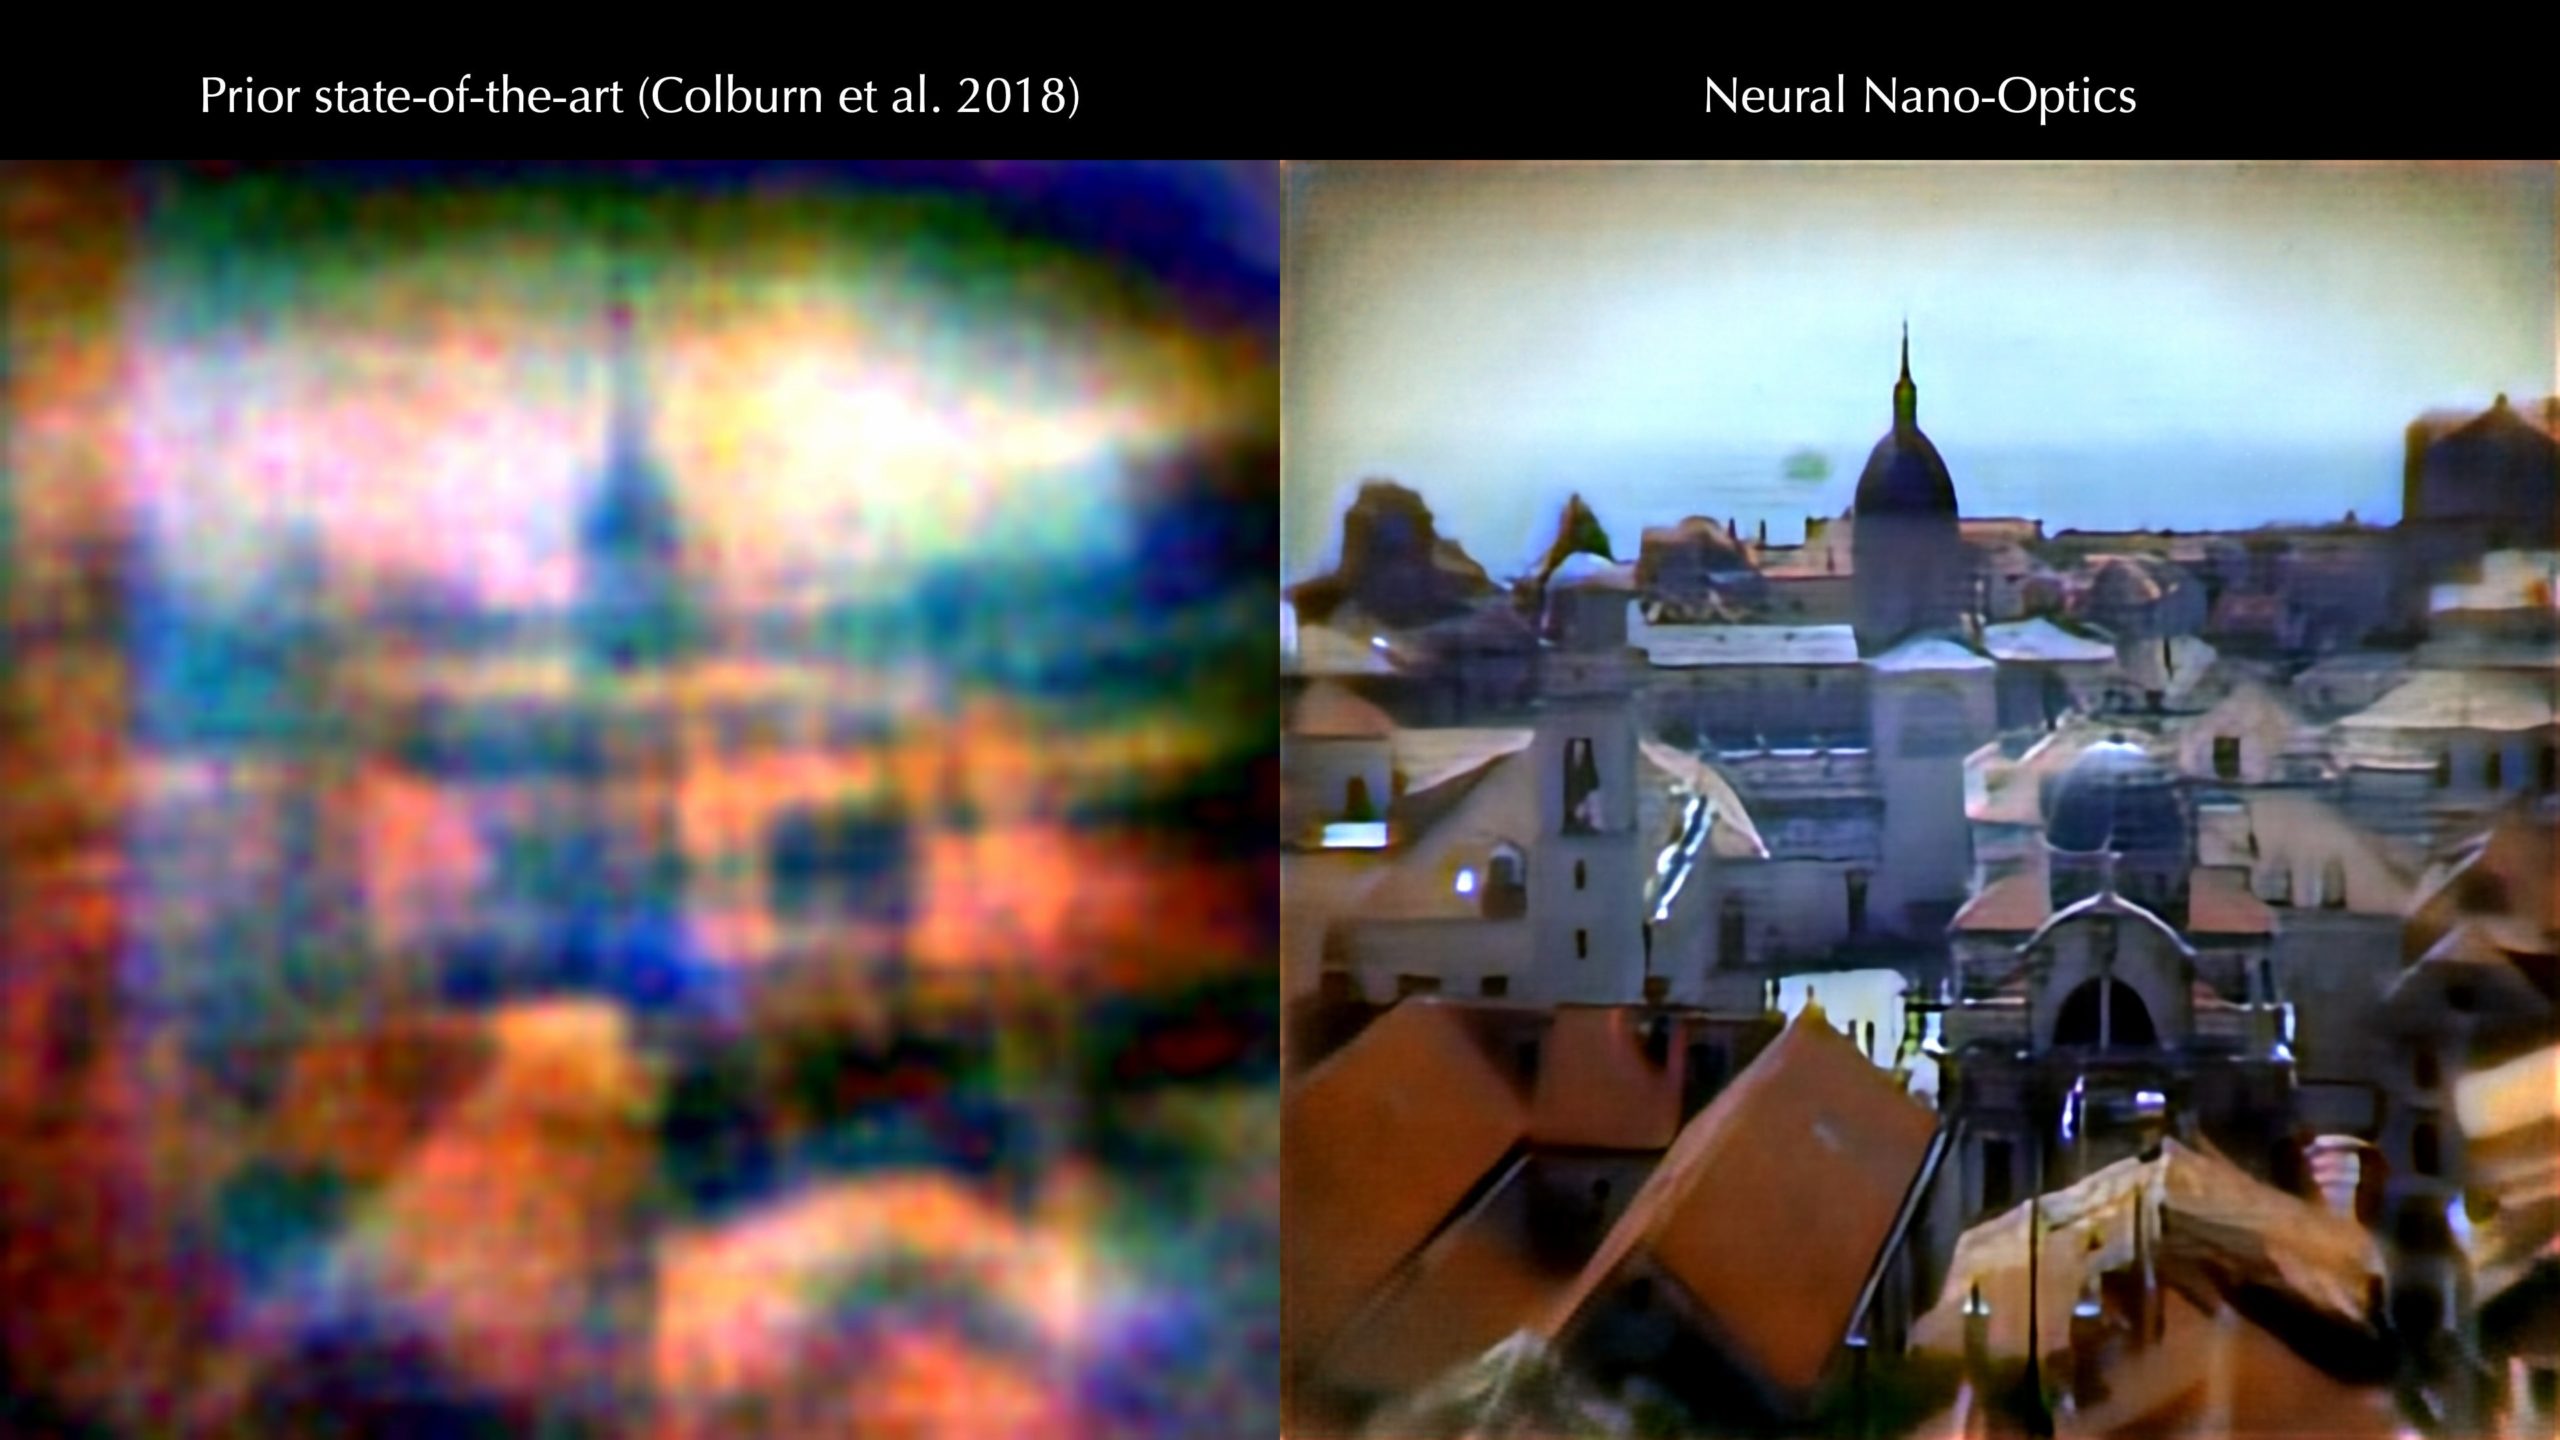 The city of Venice, as seen by the neural nano-optical camera (right) compared to an earlier, similar camera (left). (Image: Princeton University Computational Imaging Lab)